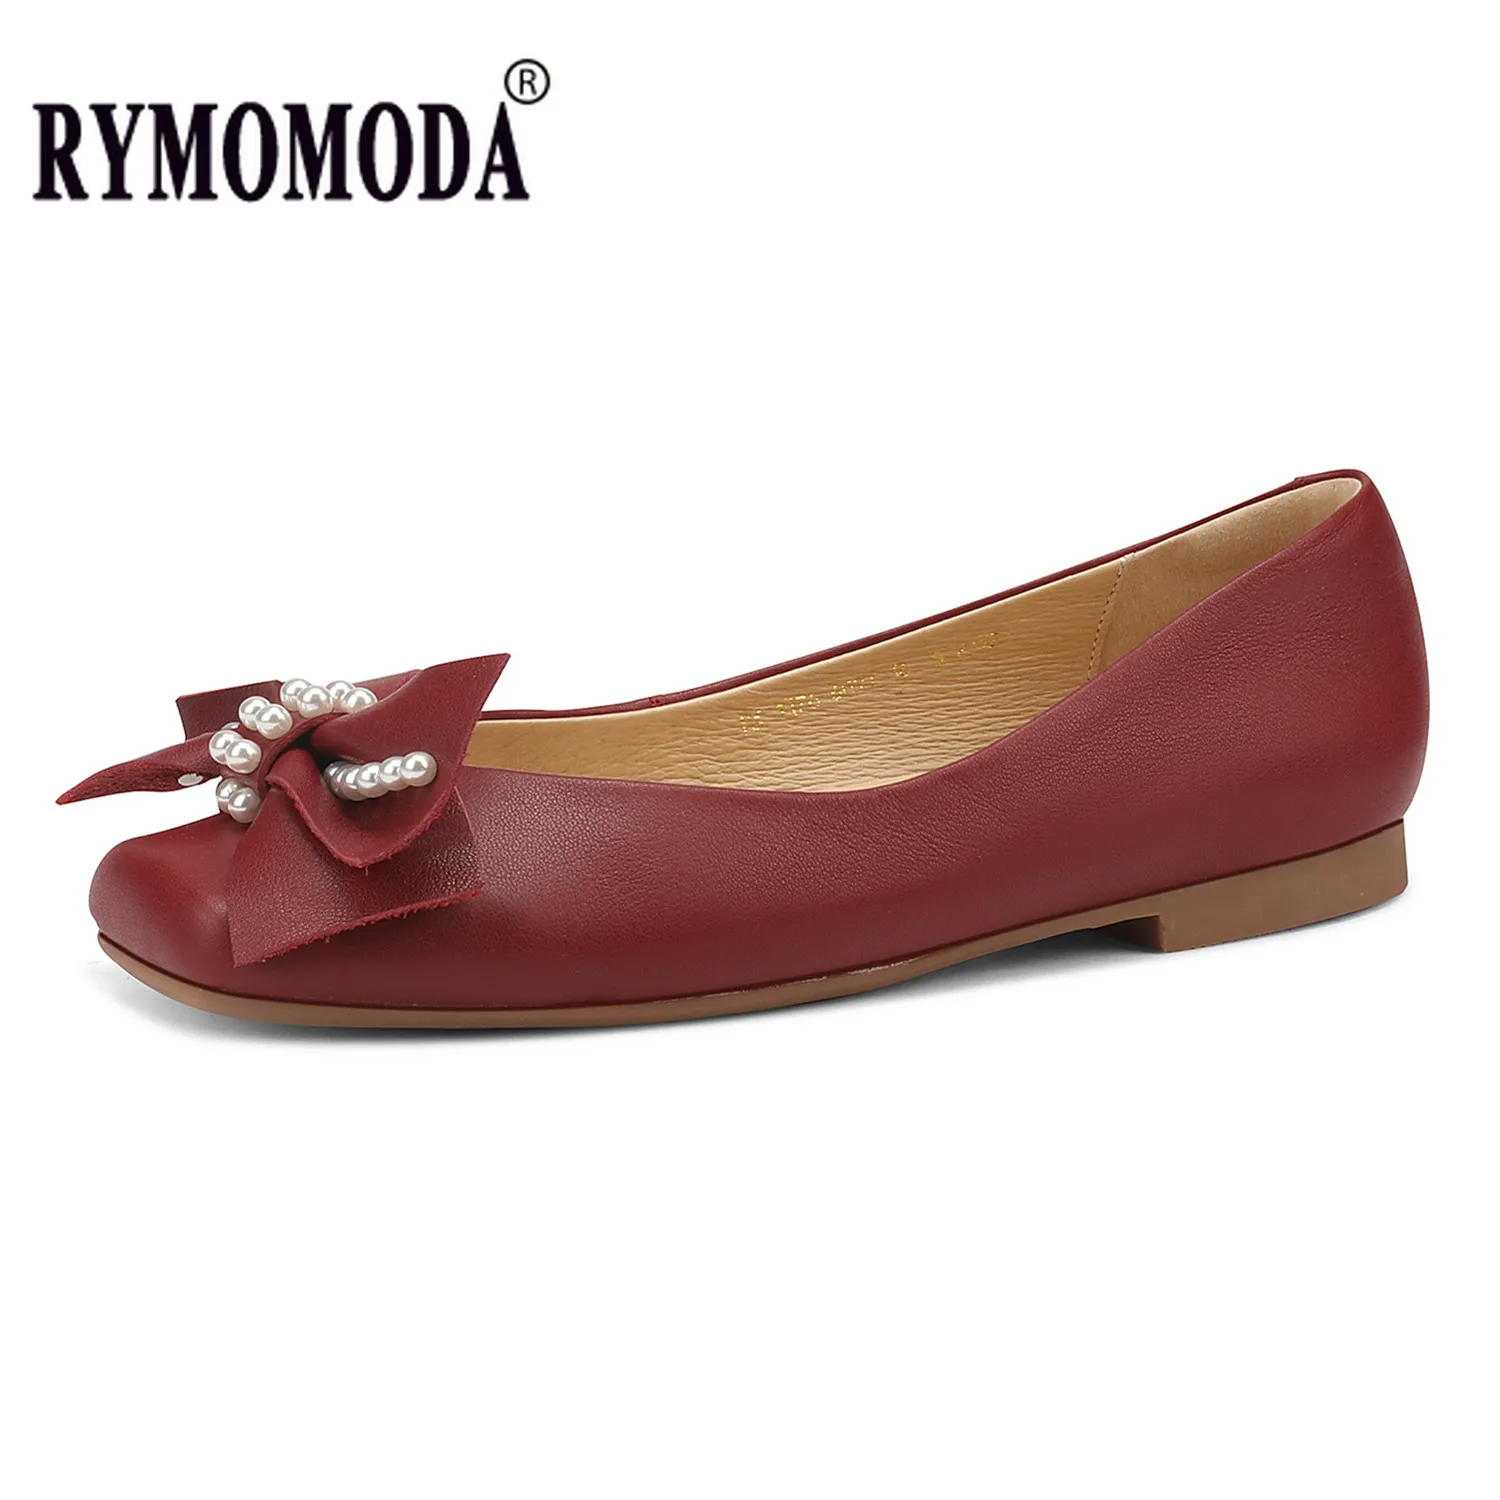 

Woman Flats Cow Genuine Leather Slip on Square Toe Pigskin Lining Sheepskin Insole Women Loafers Soft Ballet Flats Lolita Shoes